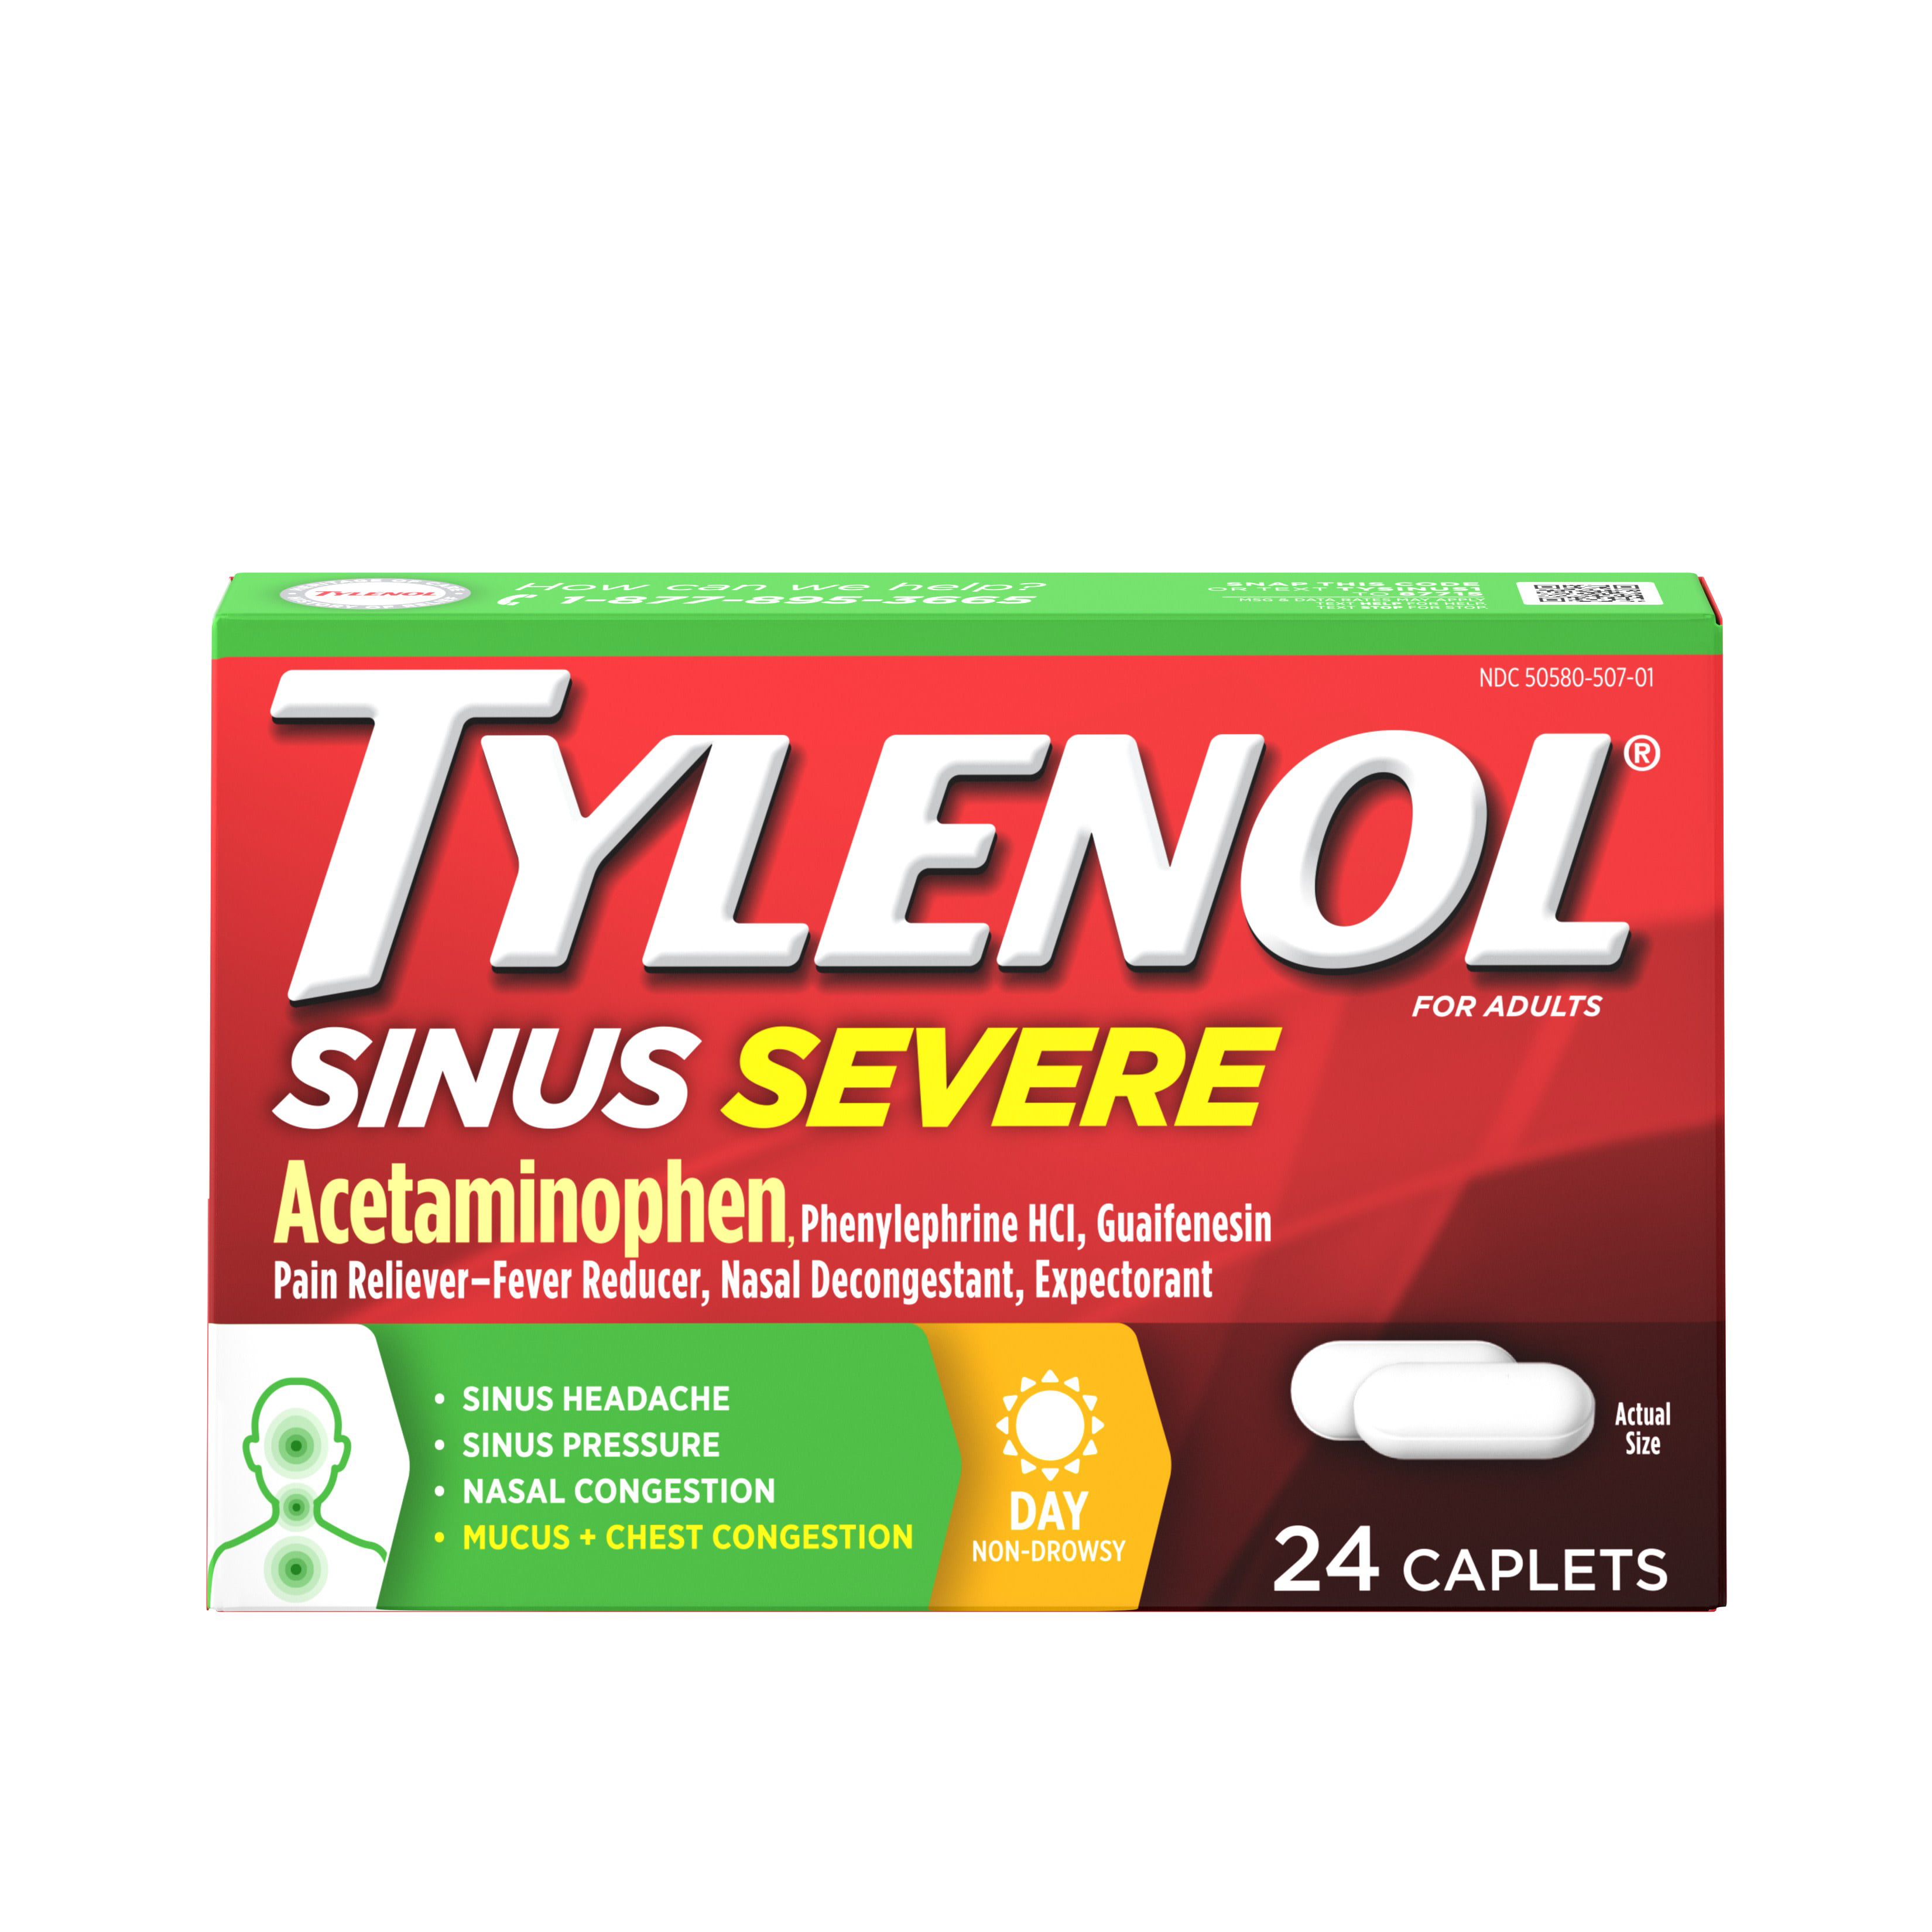 Tylenol Sinus Severe NonDrowsy Day Relief Caplets, 24 ct